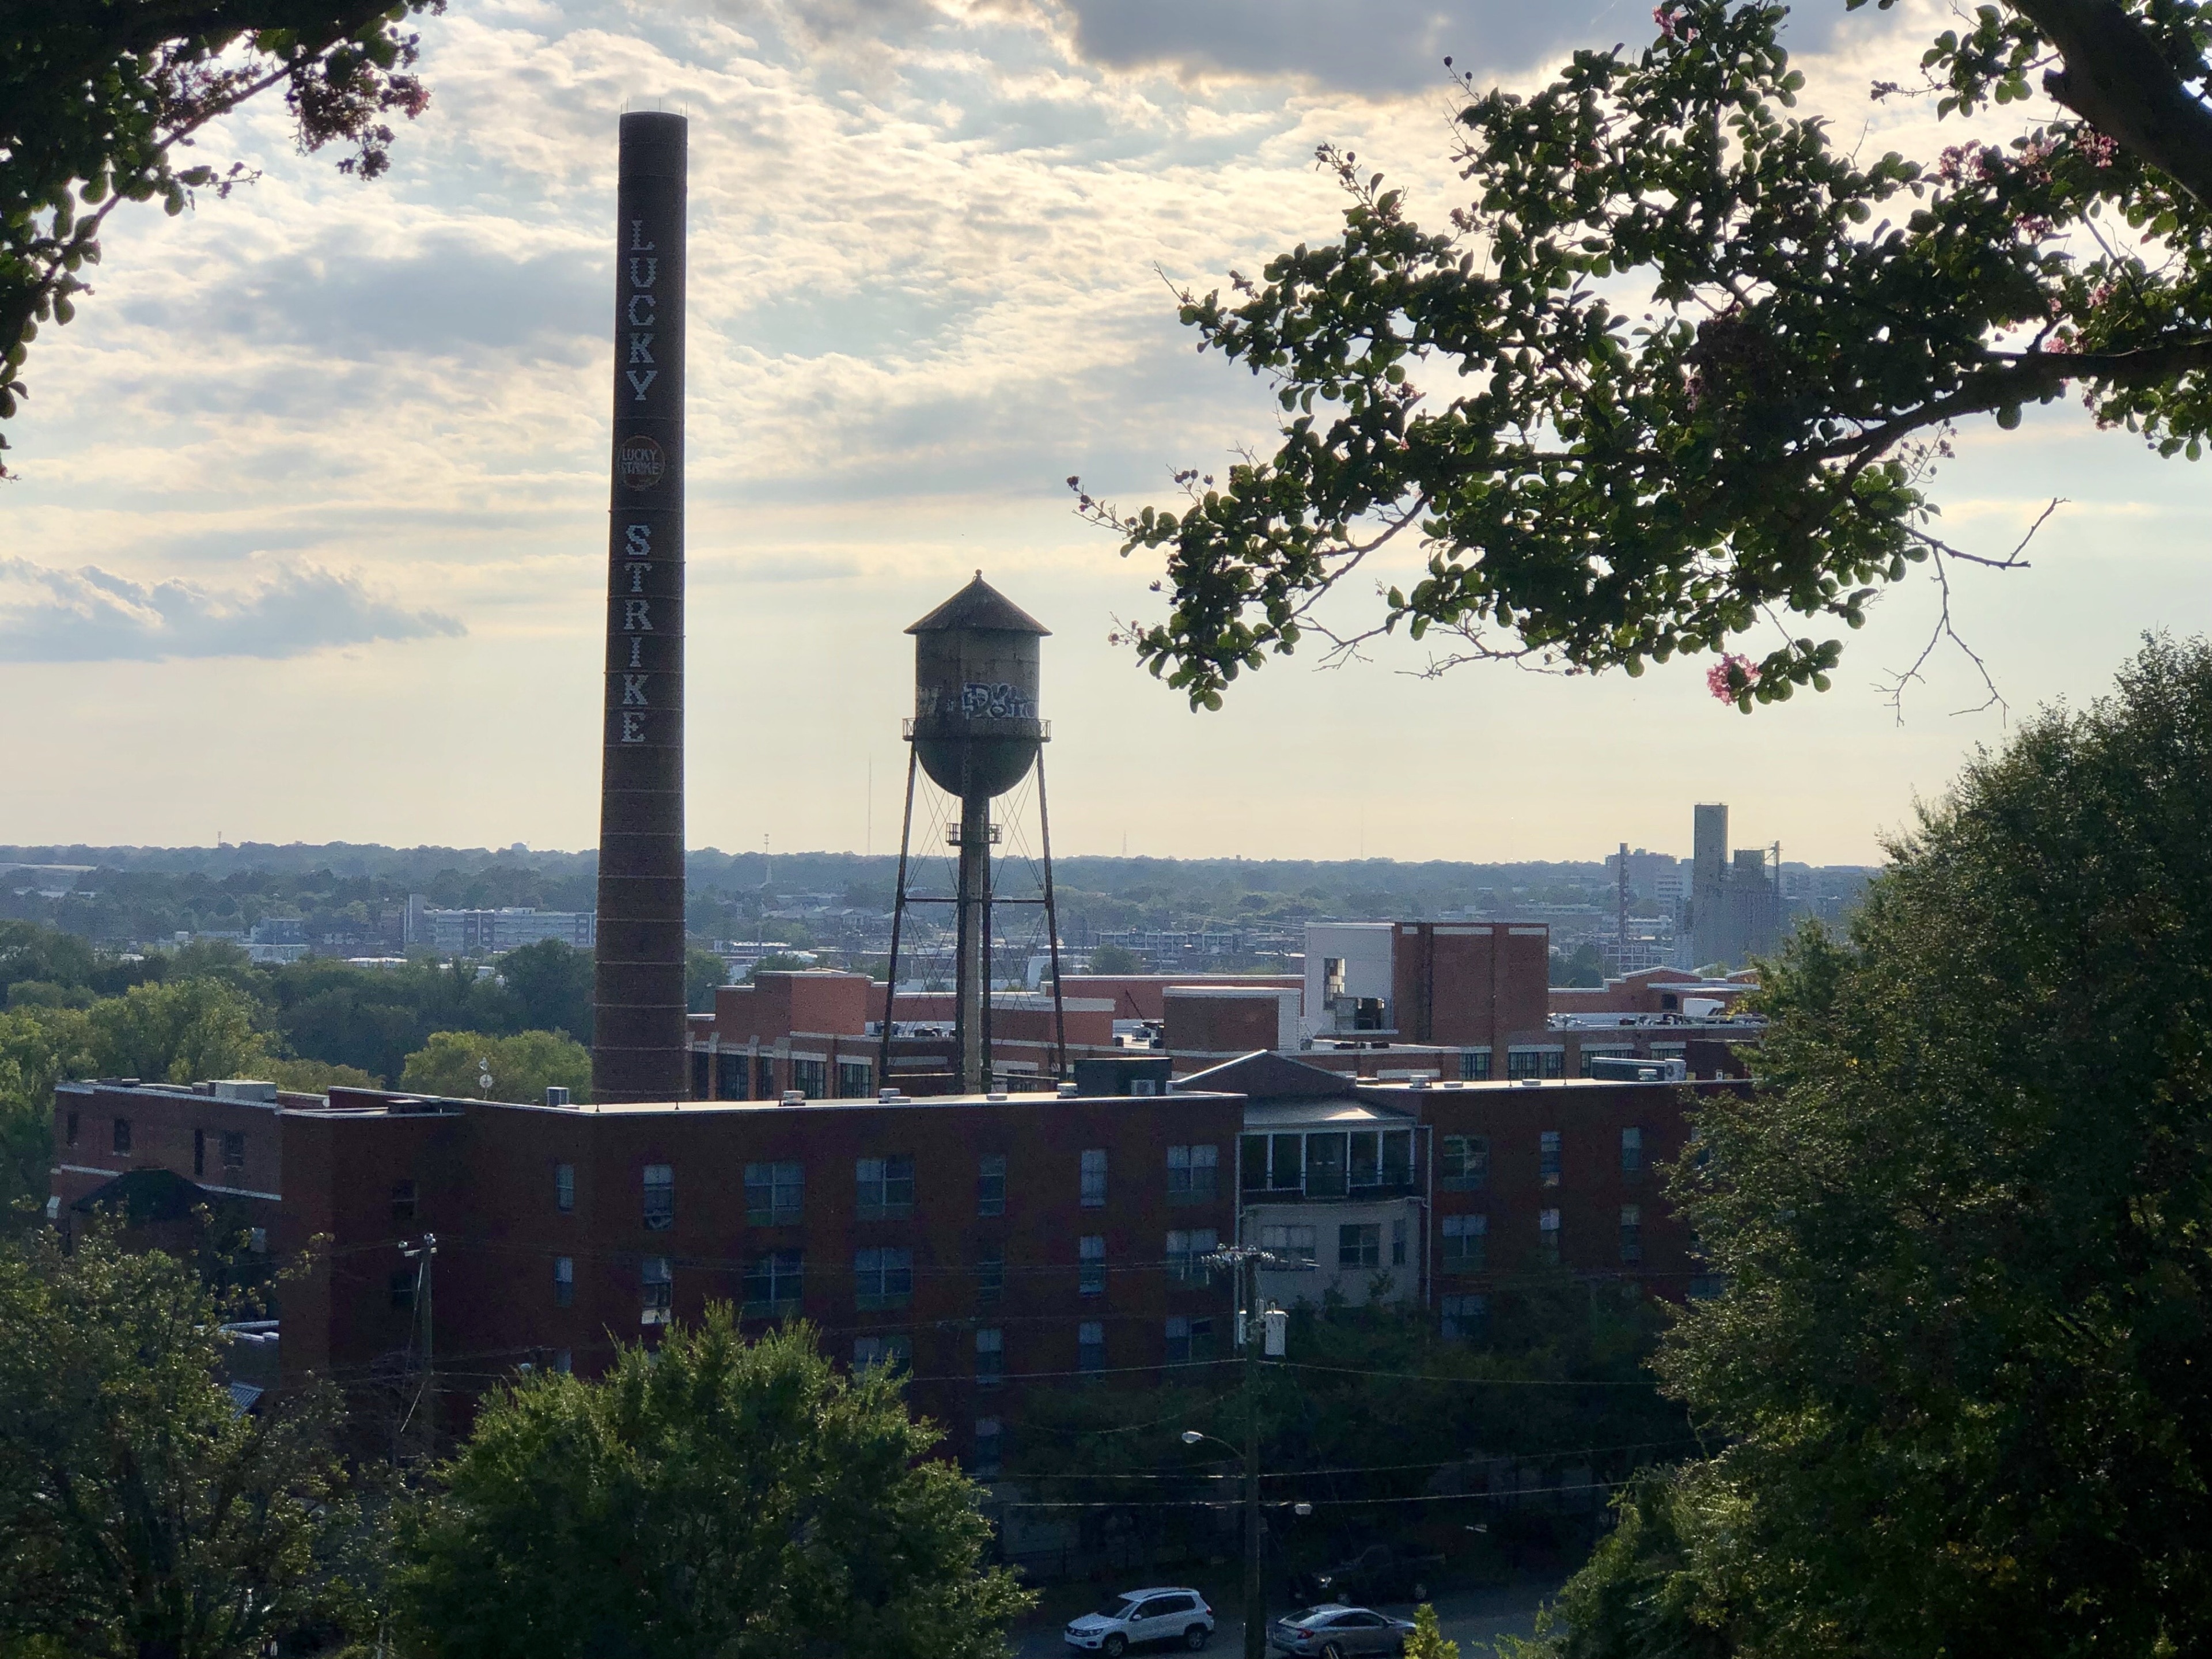 Overlooking Richmond and the old Lucky Strike factory from this city park.